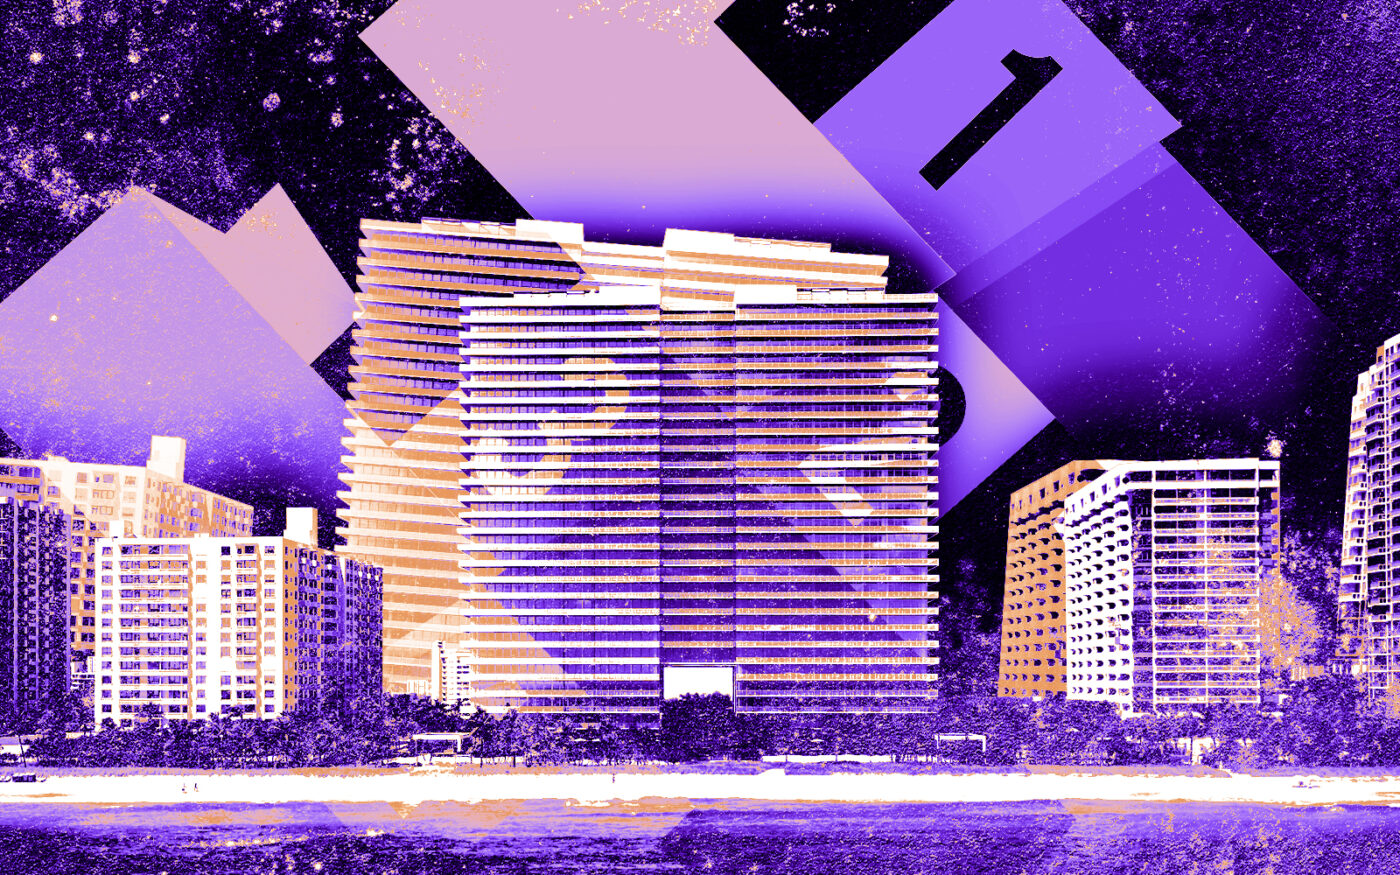 A photo illustration of Oceana Bal Harbour in Bal Harbour (Getty, Oceana Bal Harbour)